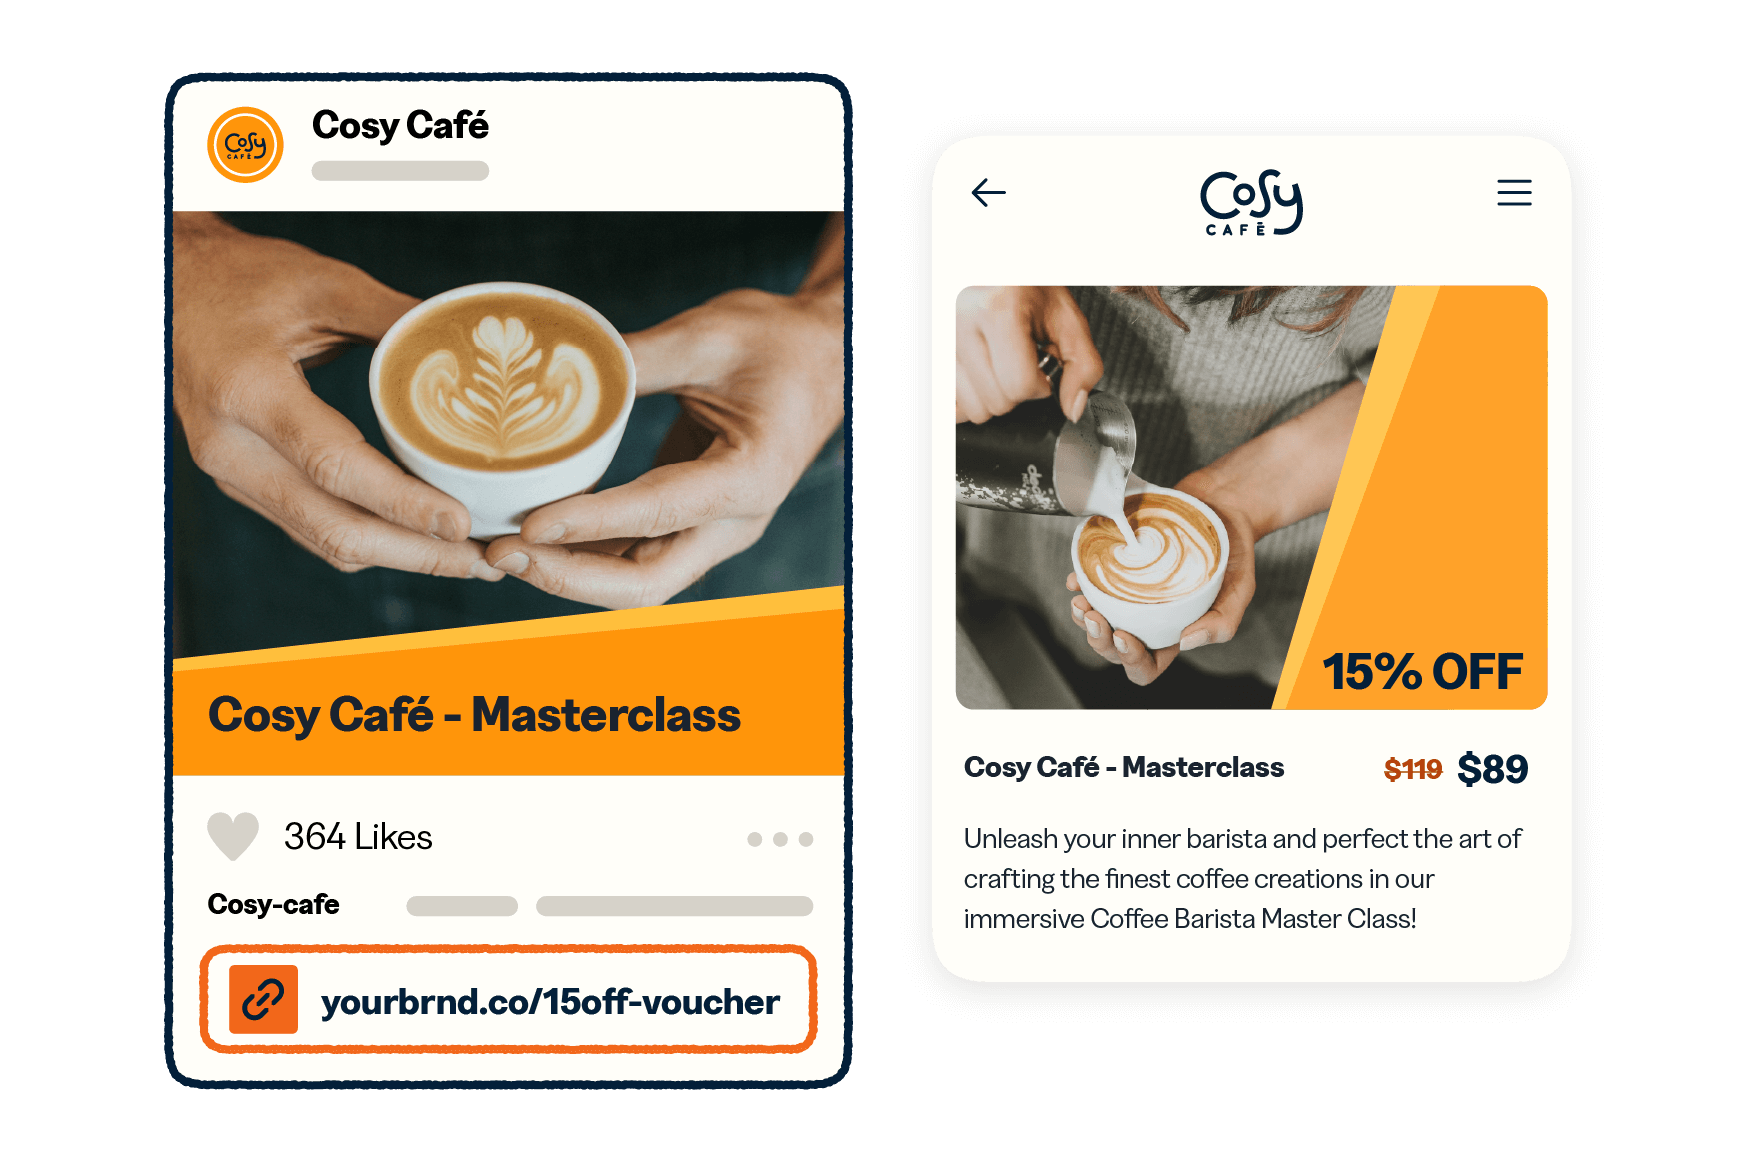 Digital ad for Cosy Cafe Masterclass